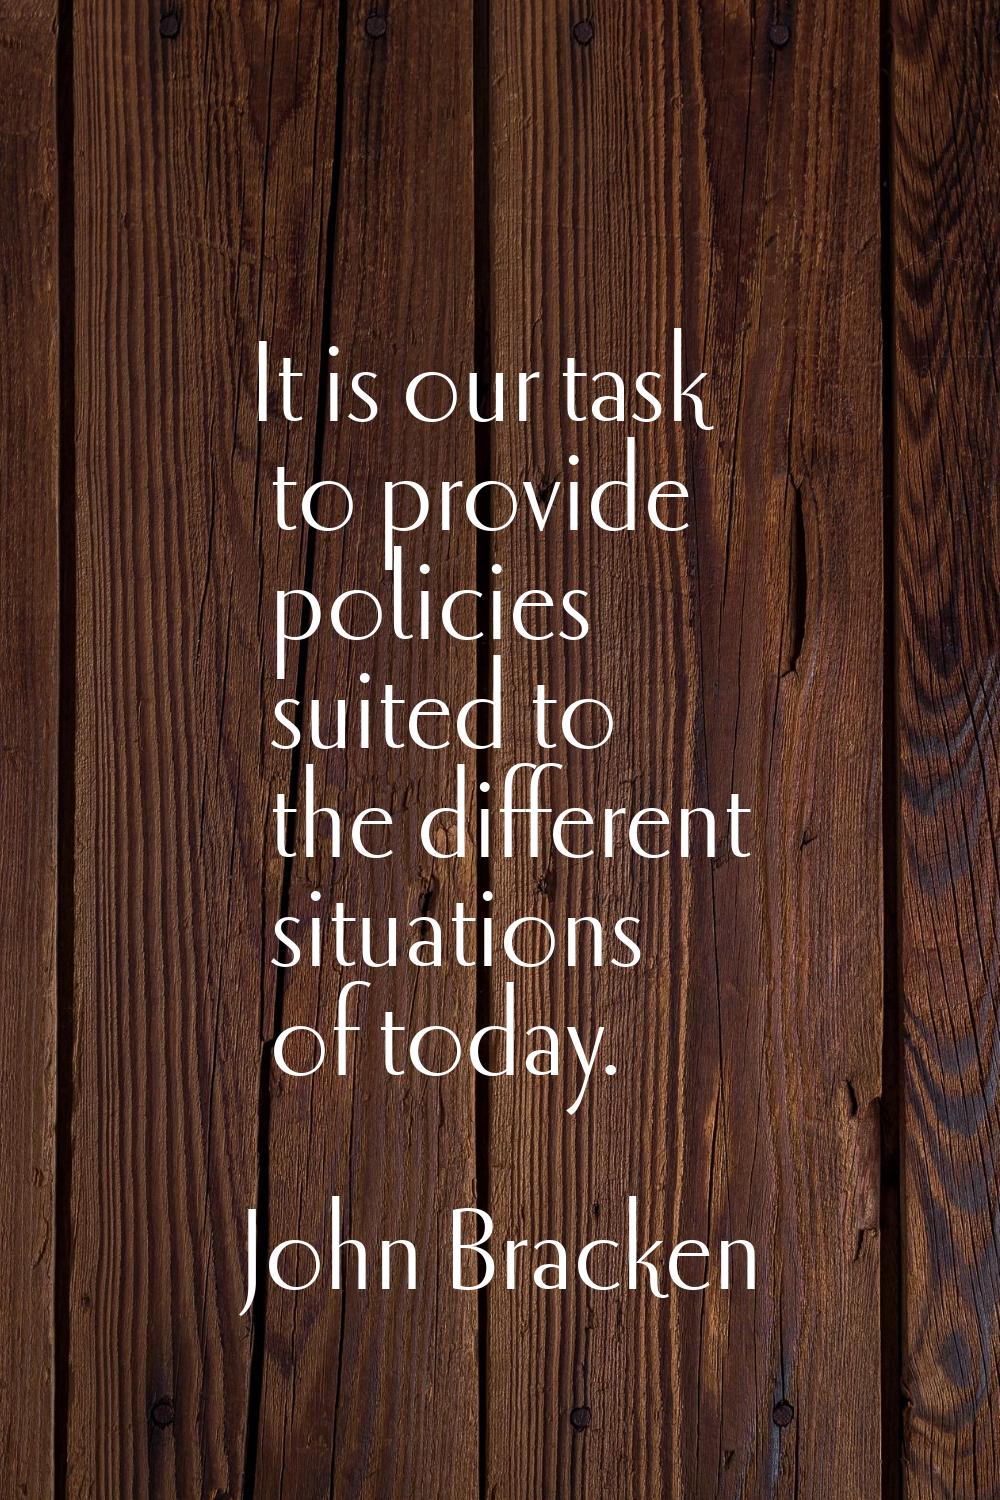 It is our task to provide policies suited to the different situations of today.